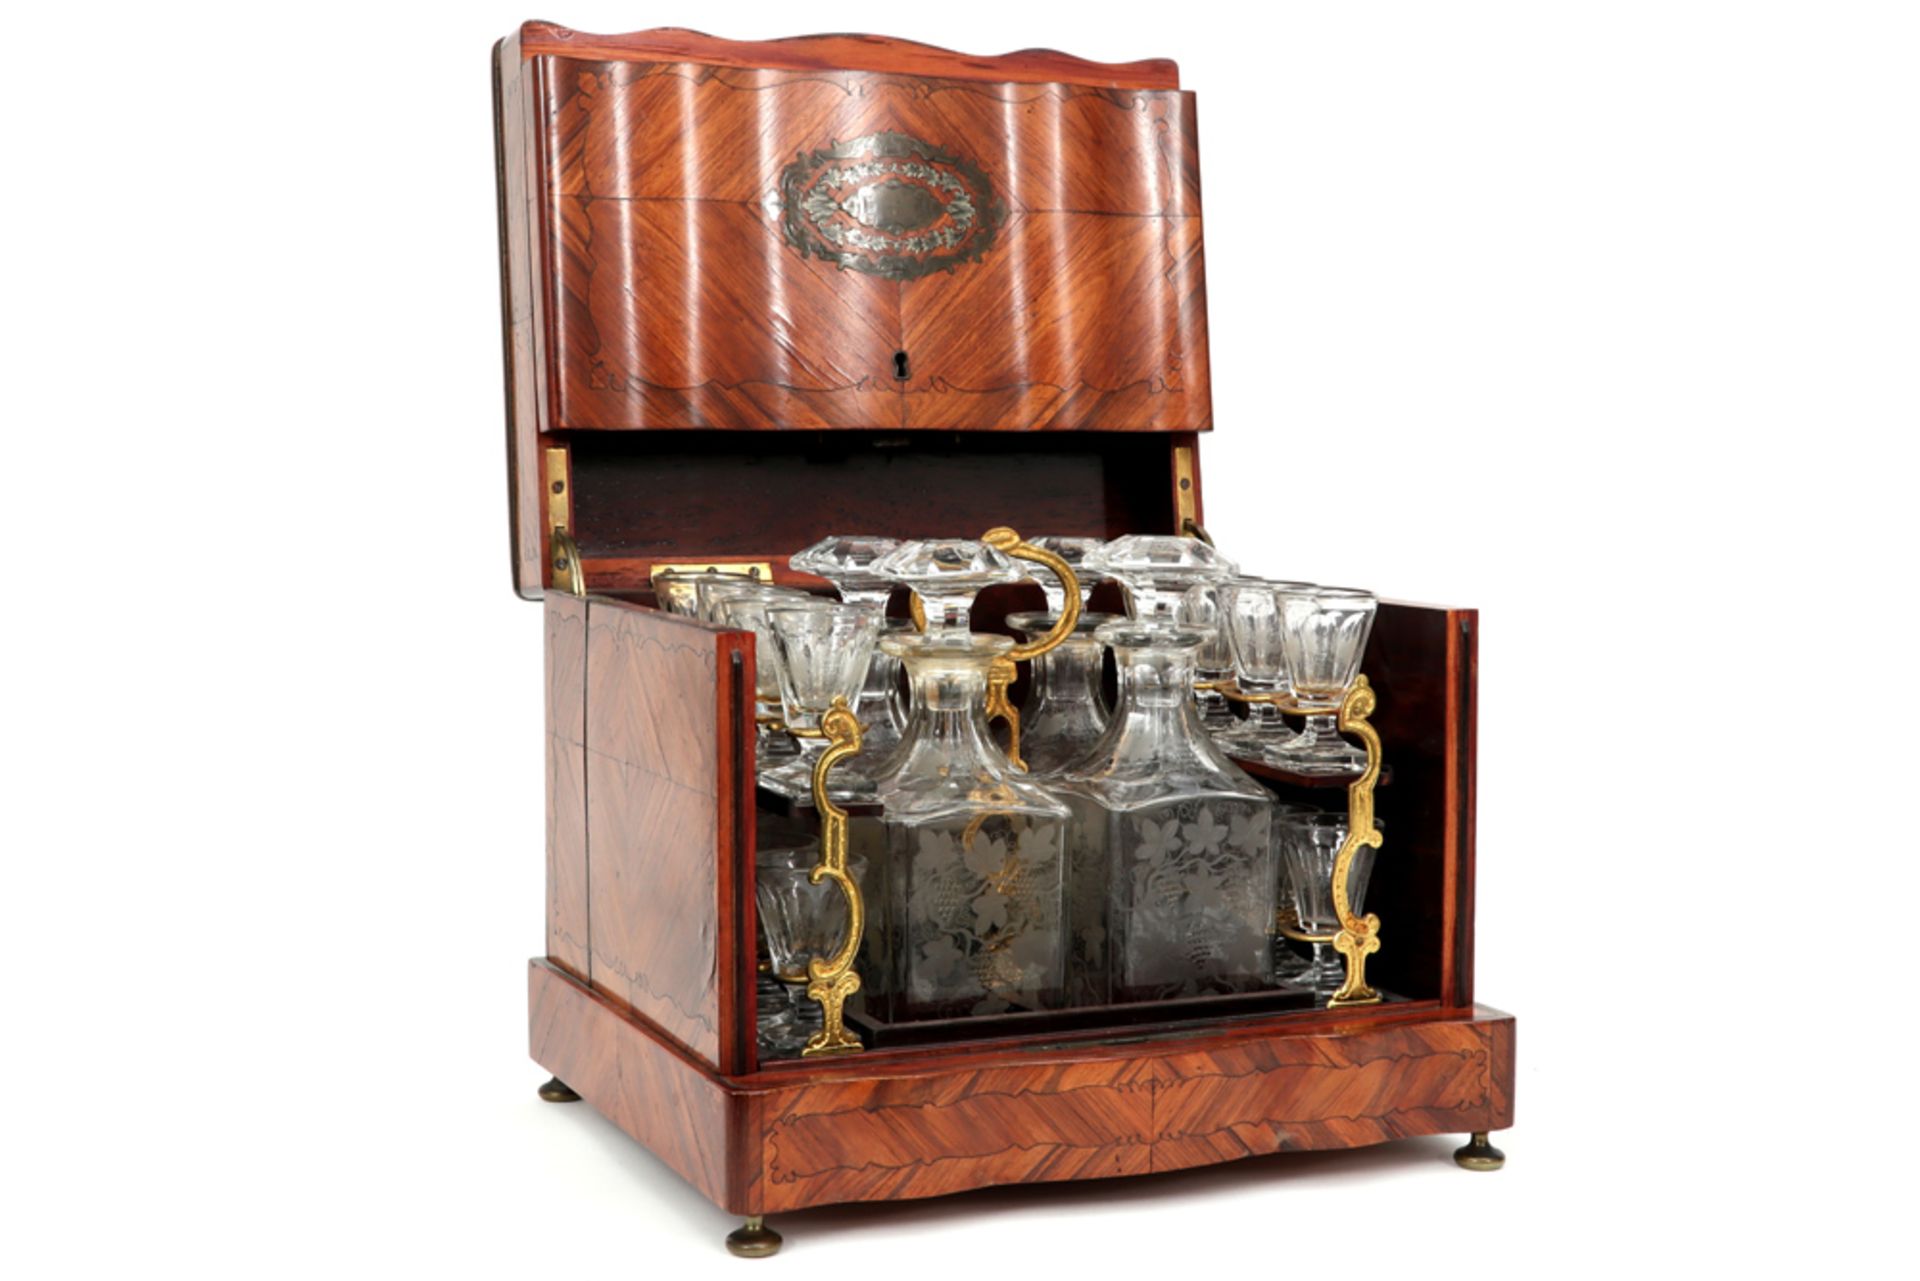 19th Cent. Napoleon III style licquor cabinet in rose-wood and marquetry and with its original